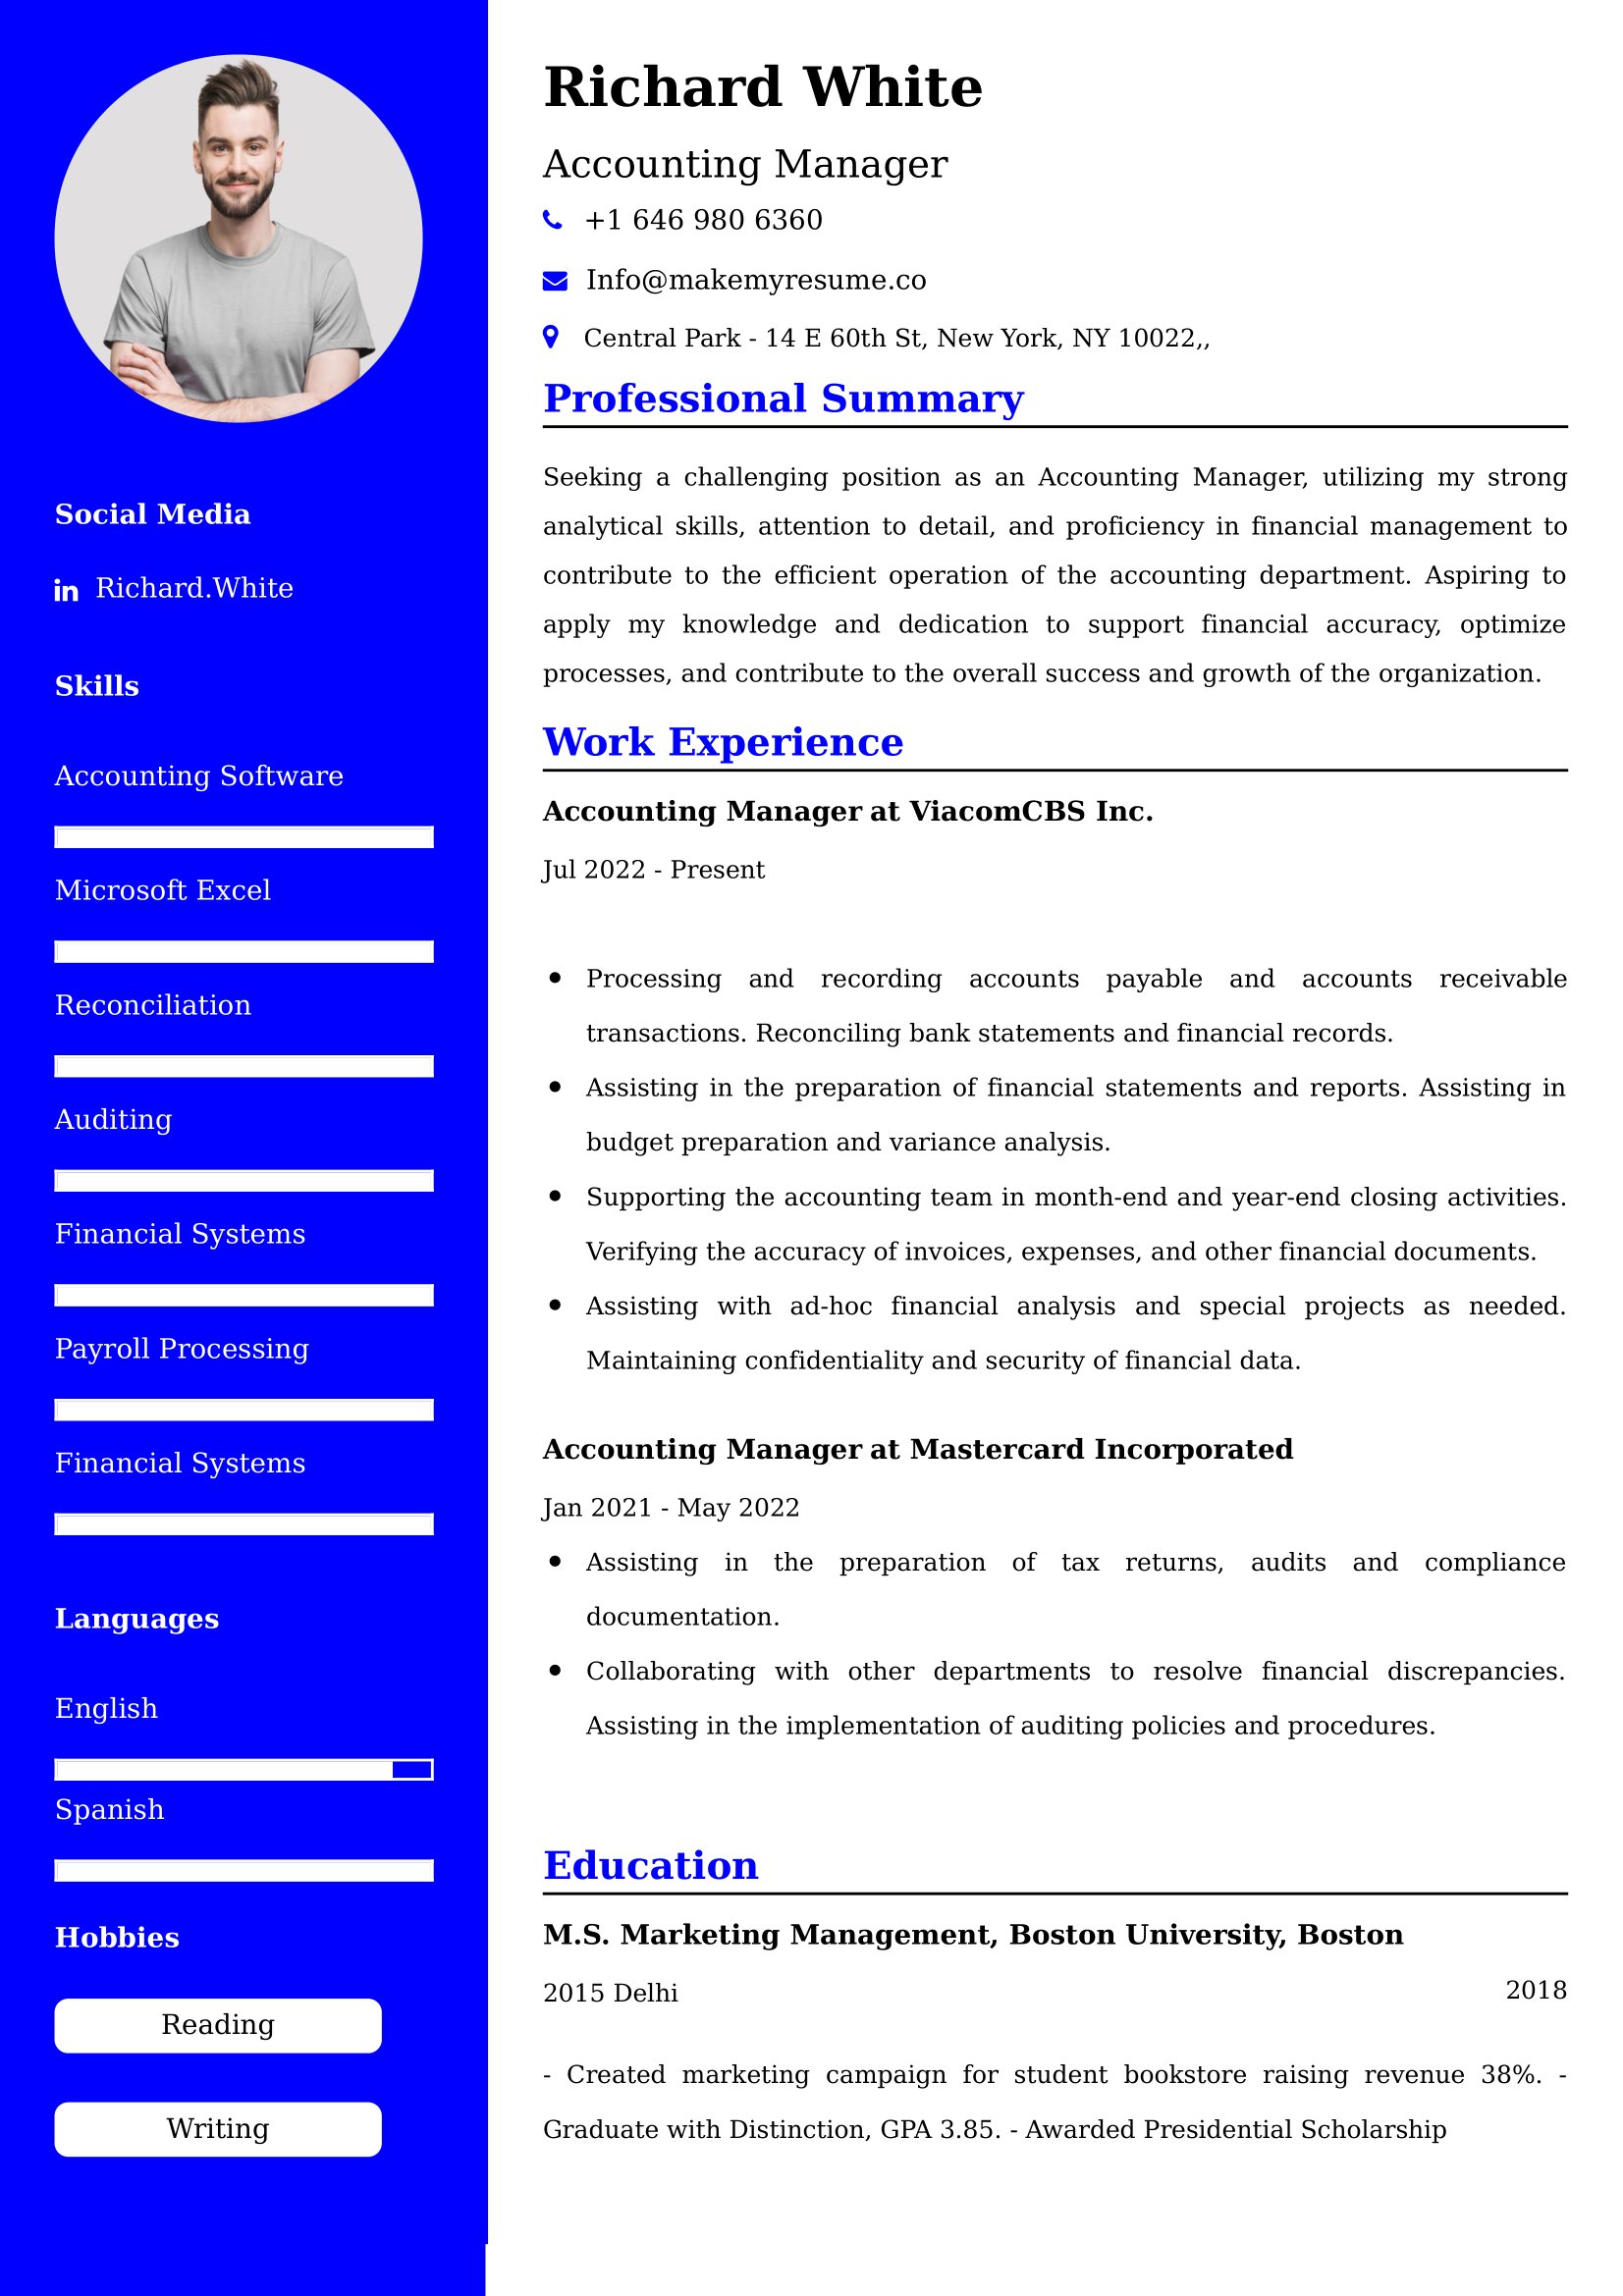 Accounting Manager Resume Examples - Australian Format and Tips